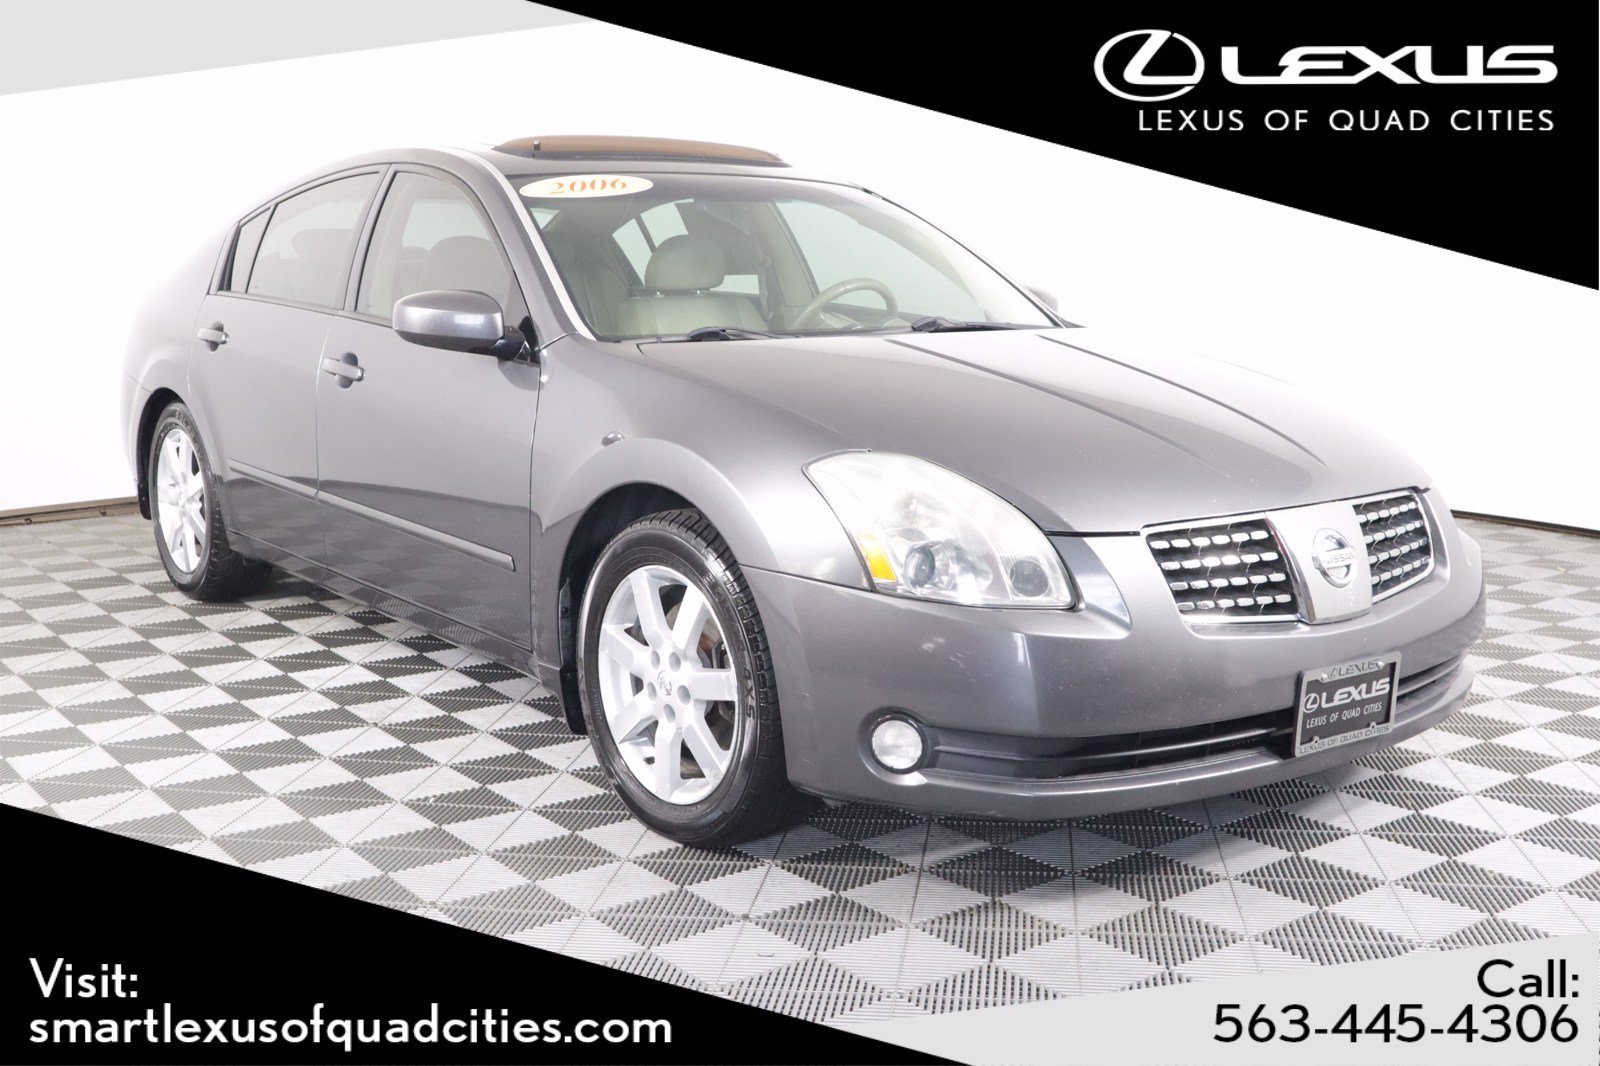 Pre-Owned 2006 Nissan Maxima 3.5 SL 4dr Car in Davenport #L20702C